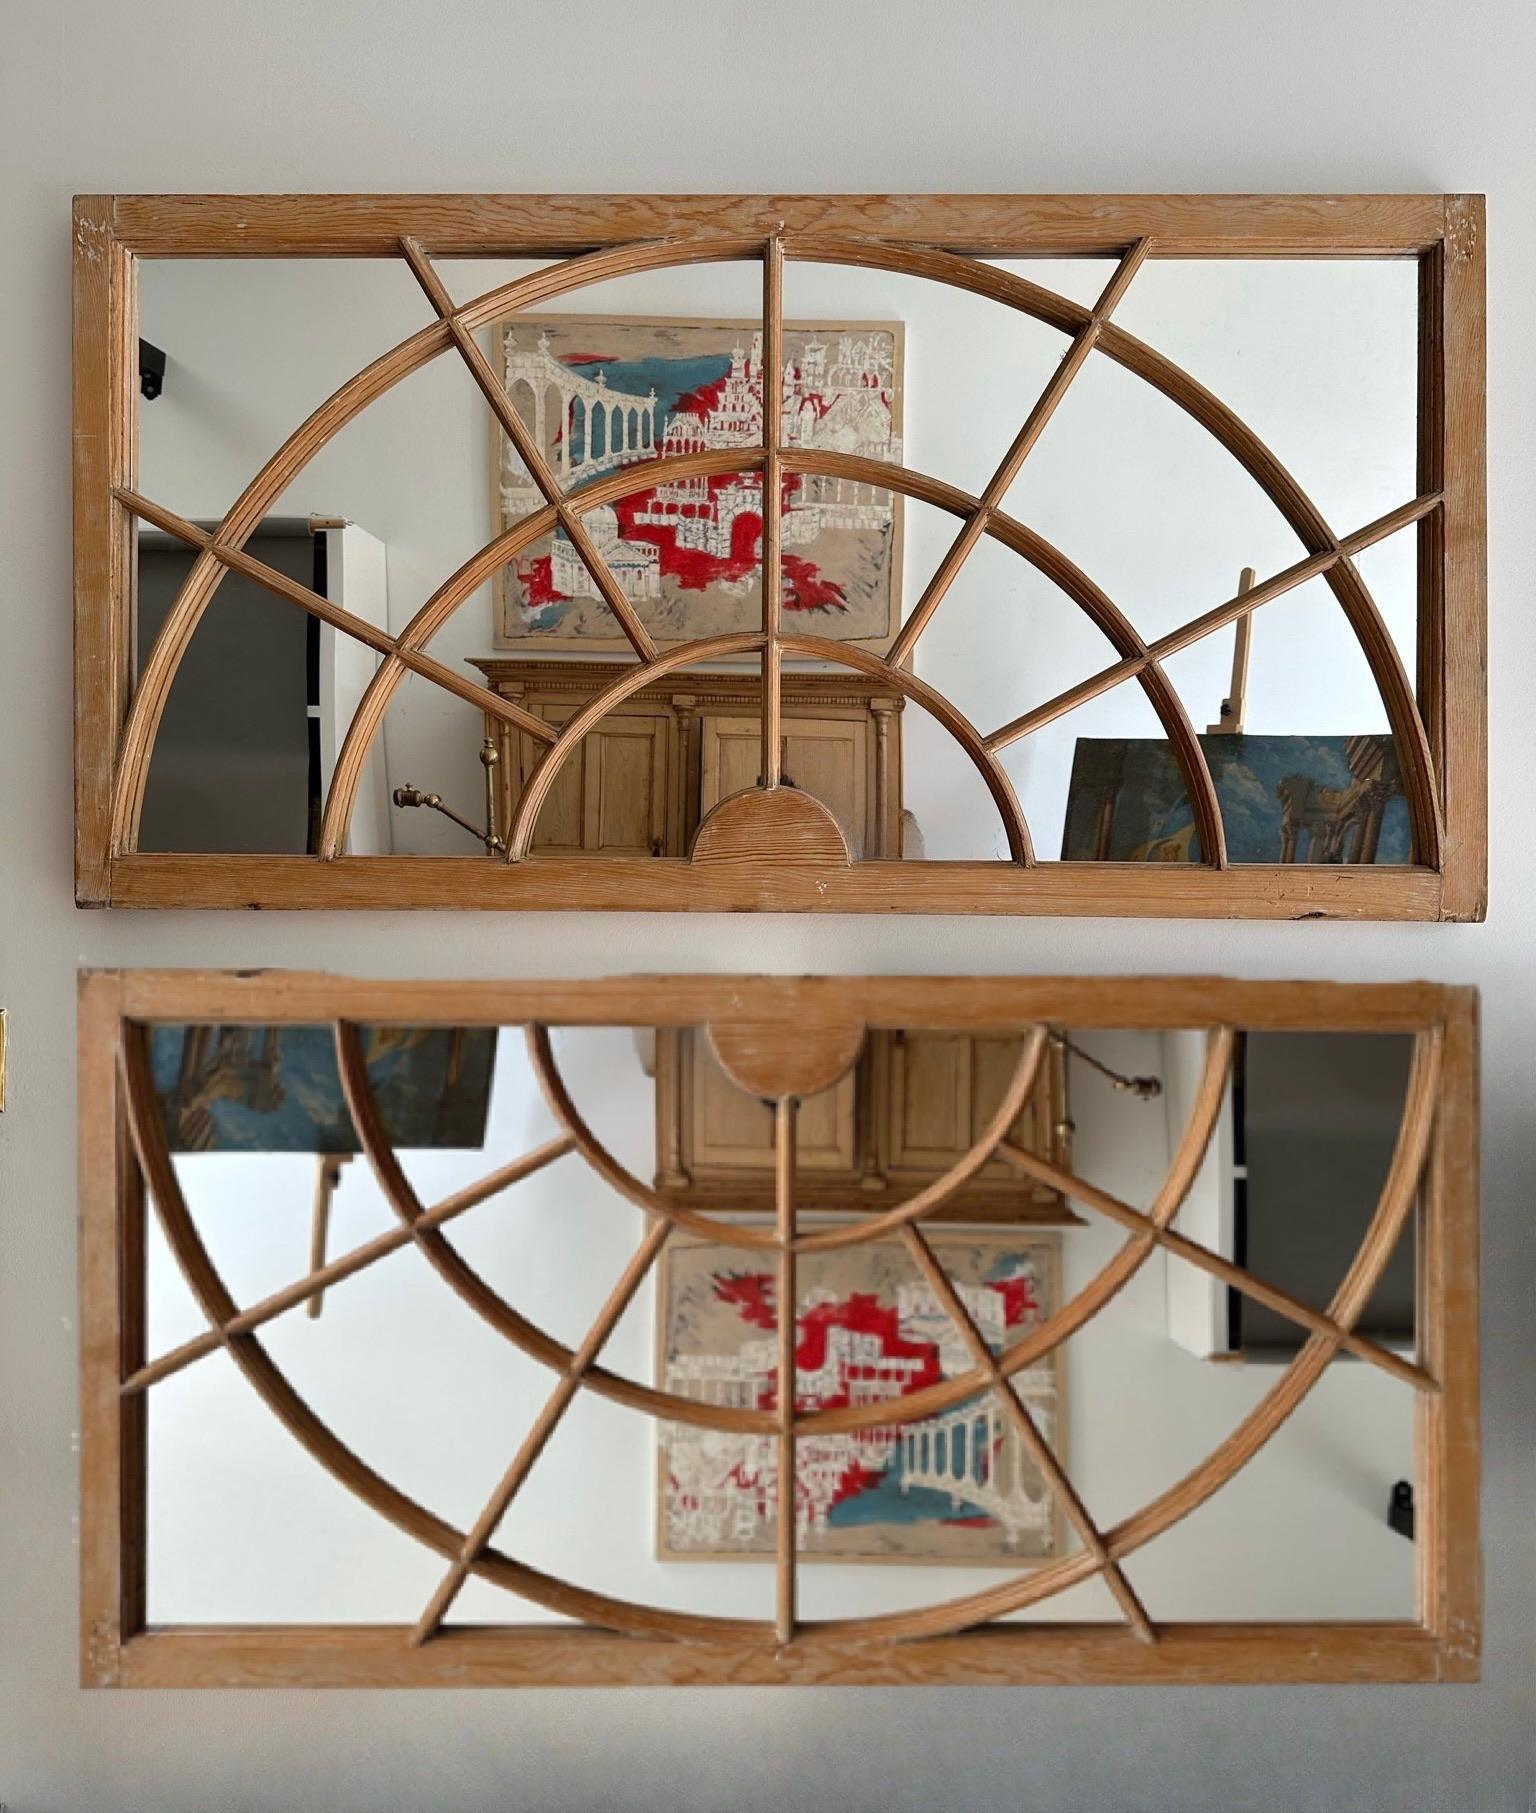 Unusual Pair of Georgian Styled Transom Windows Converted to Mirrors. Constructed of Pine with Arched Moulded Mullions and custom mirror panels. Made in Virginia circa 1850